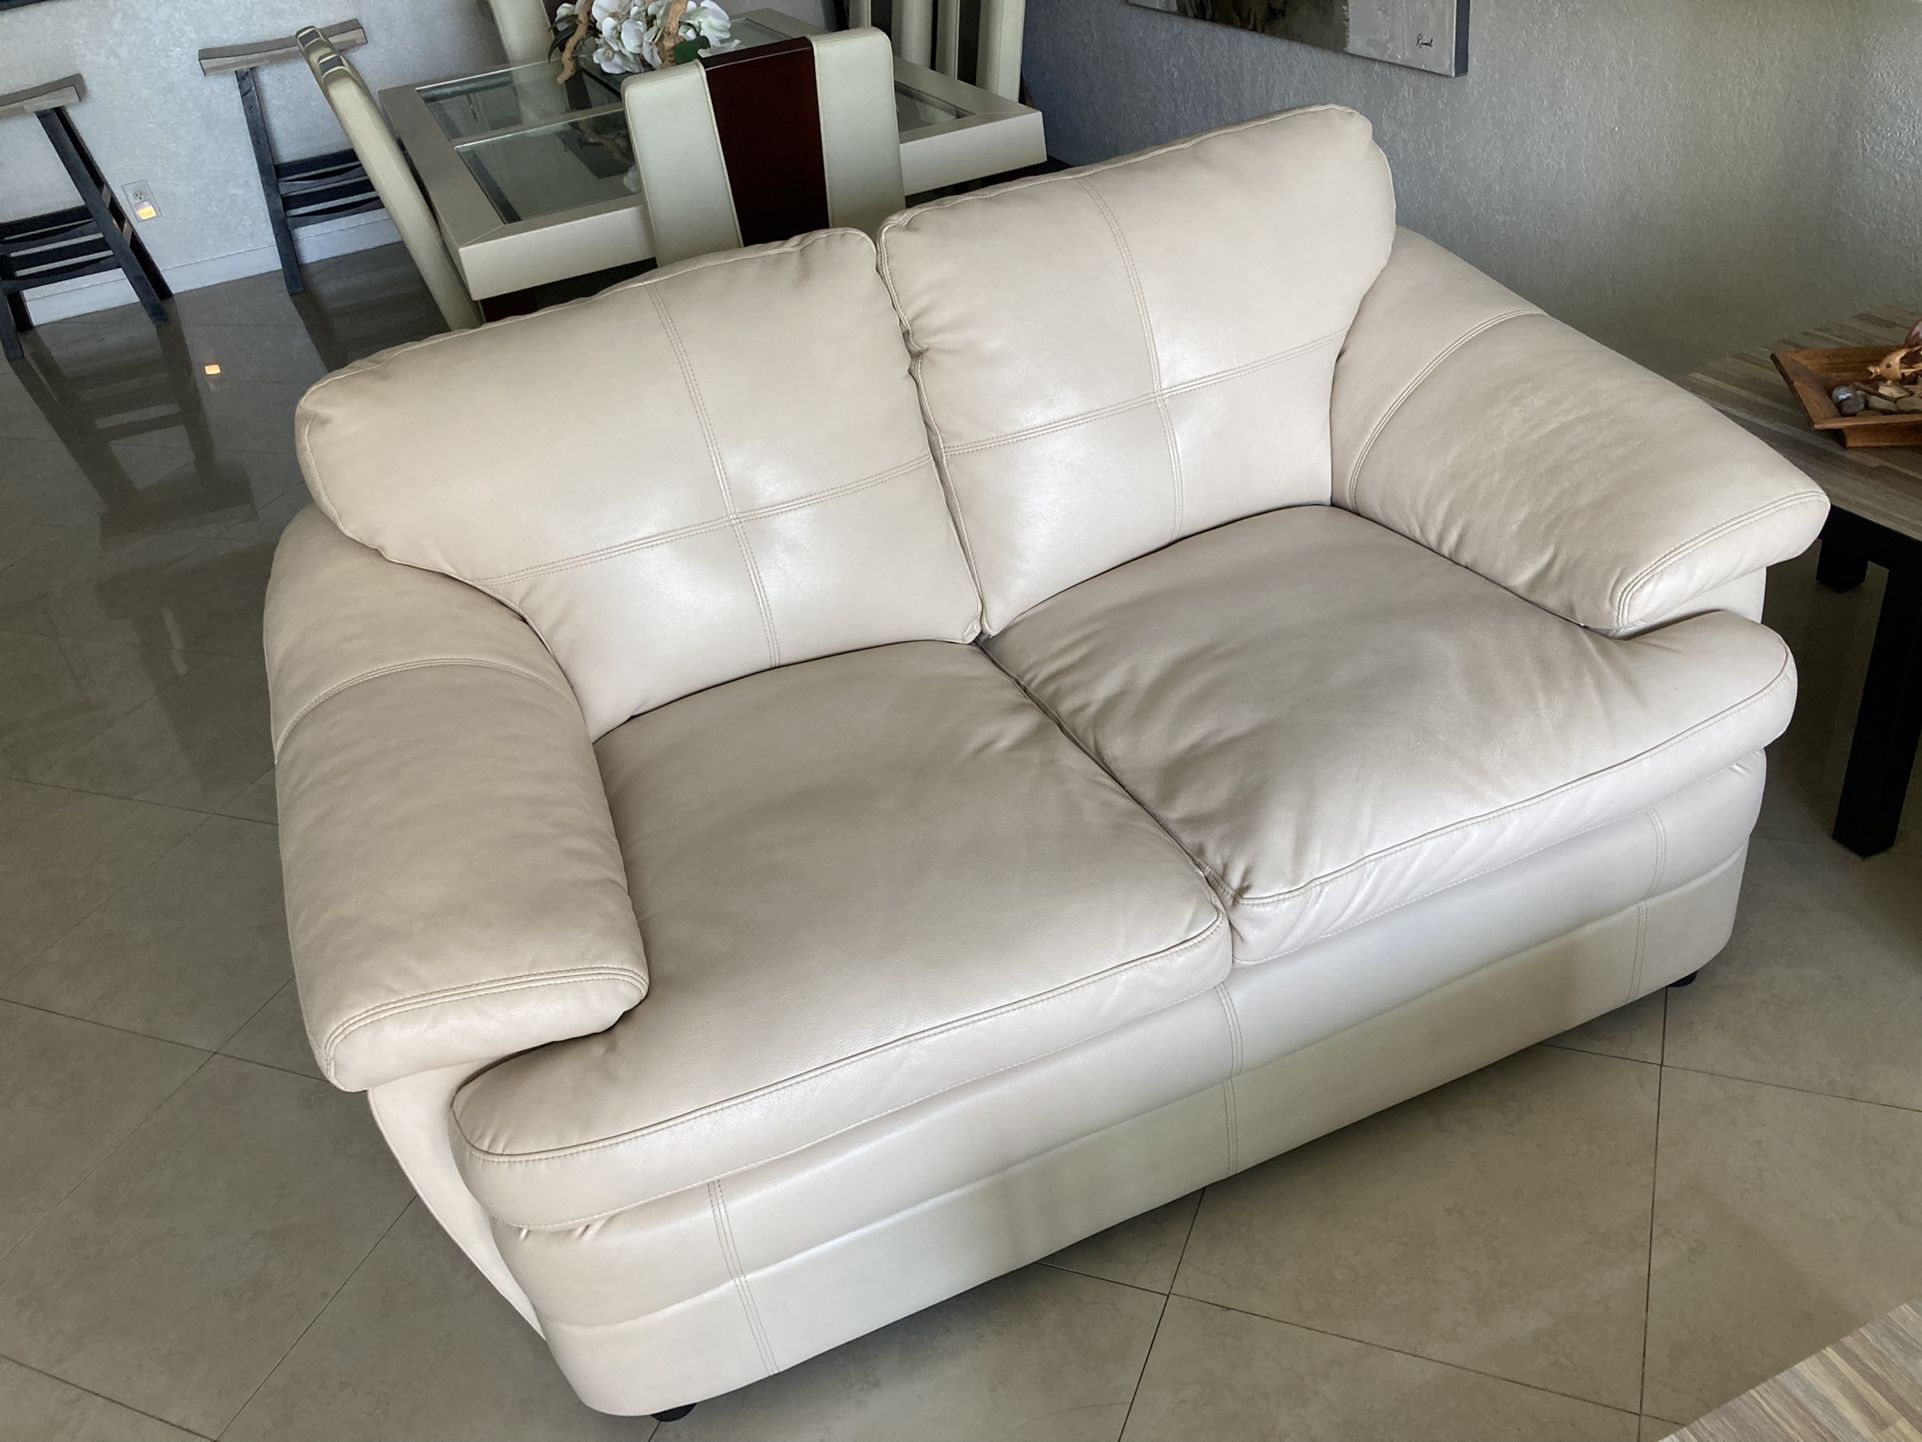 New Loveseat Small Sofa Couch For Sale! 🔥